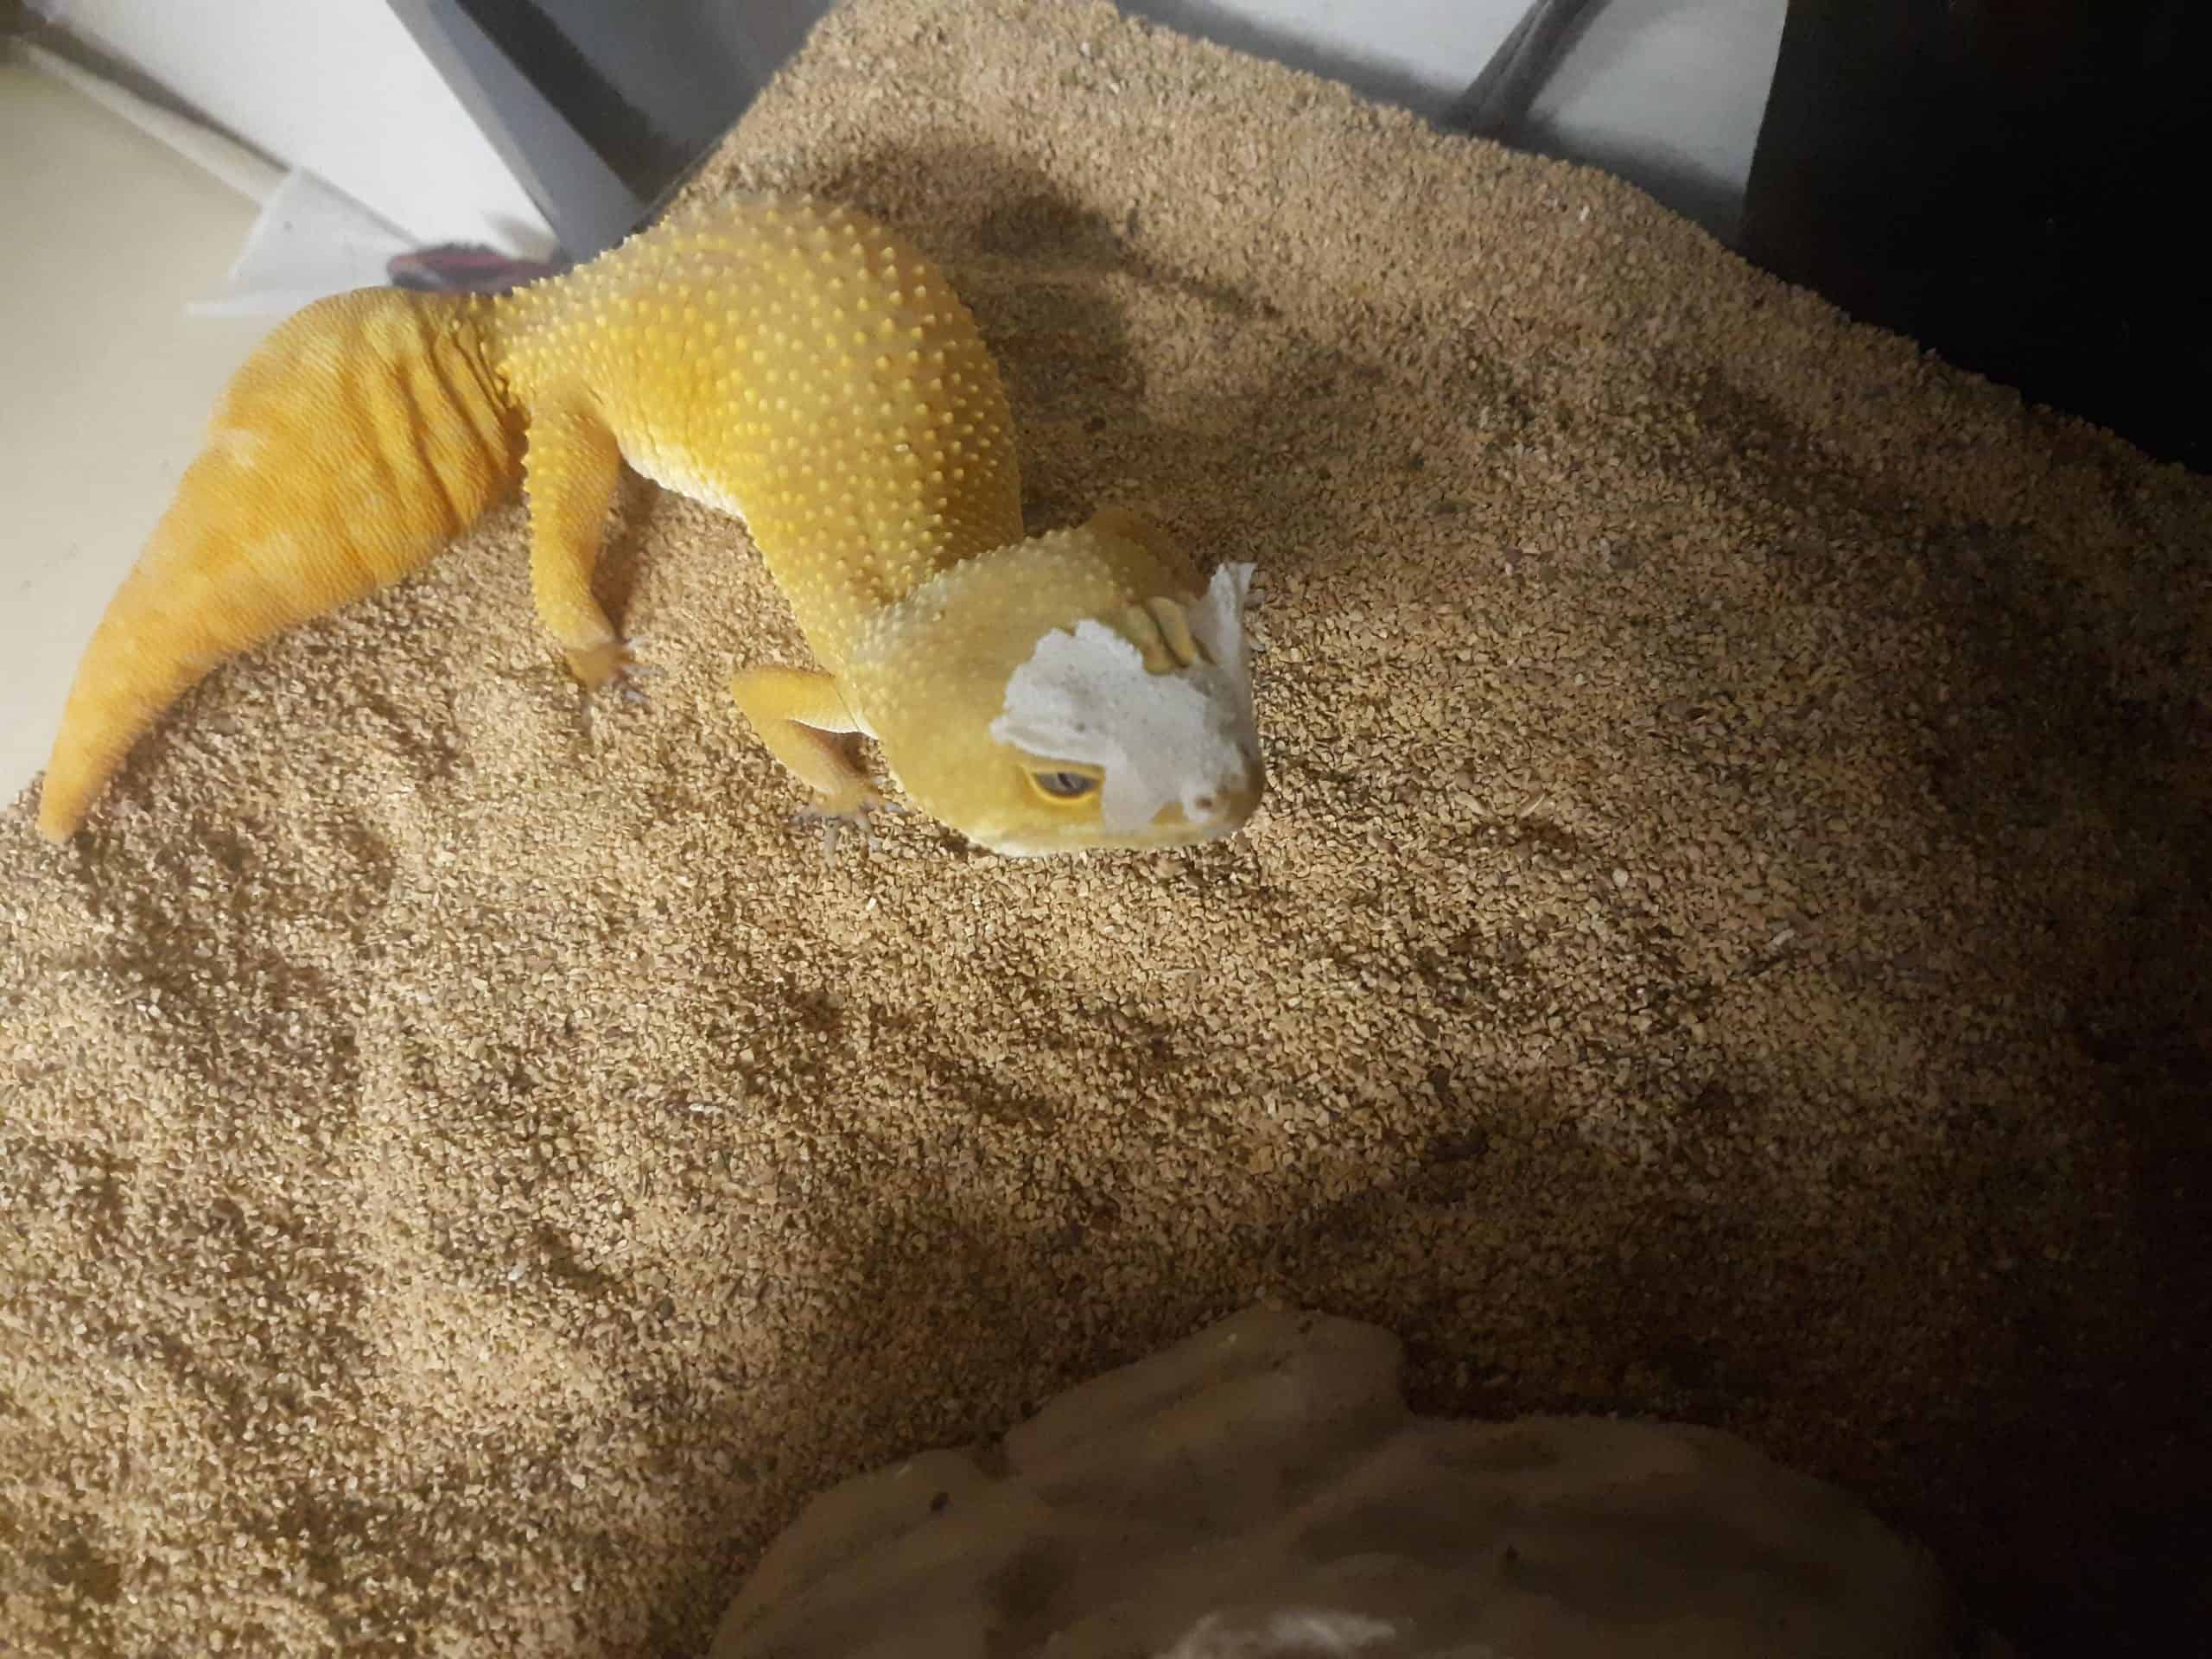 leopard gecko with some unshed skin